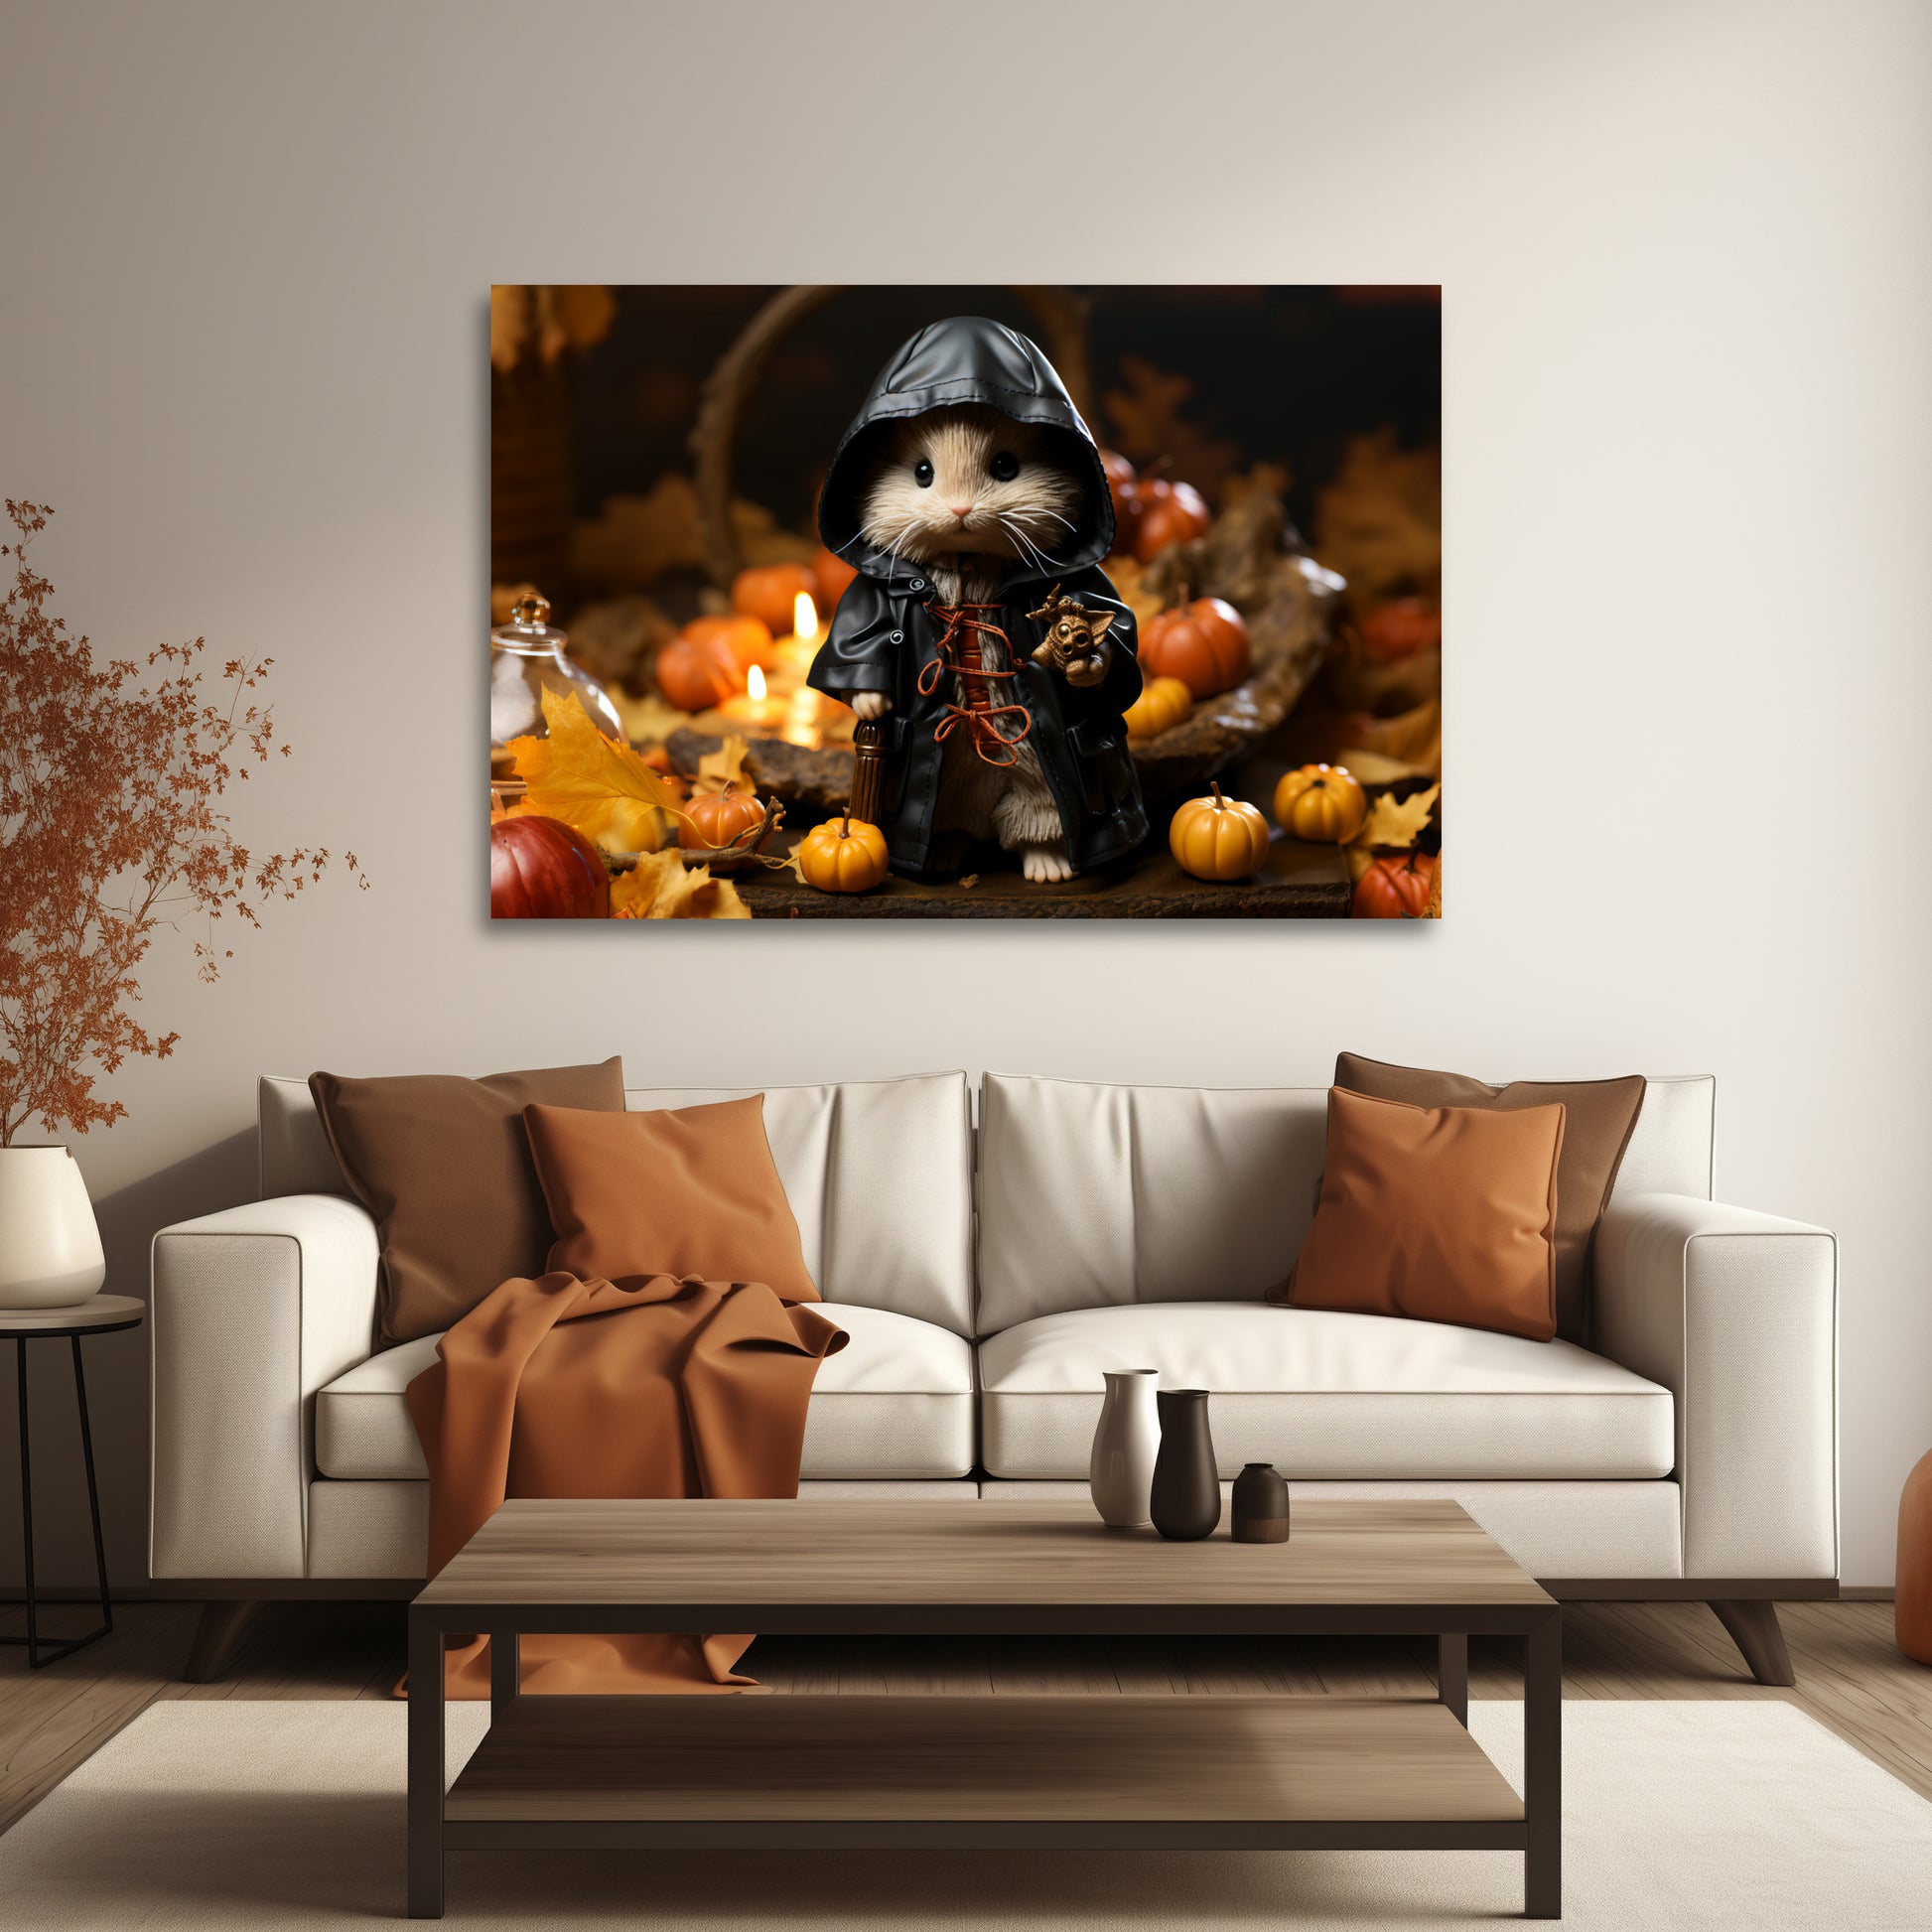 adorable mouse trick-or-treater aesthetic Halloween wall decor, trick-or-treating mouse Halloween wall decor